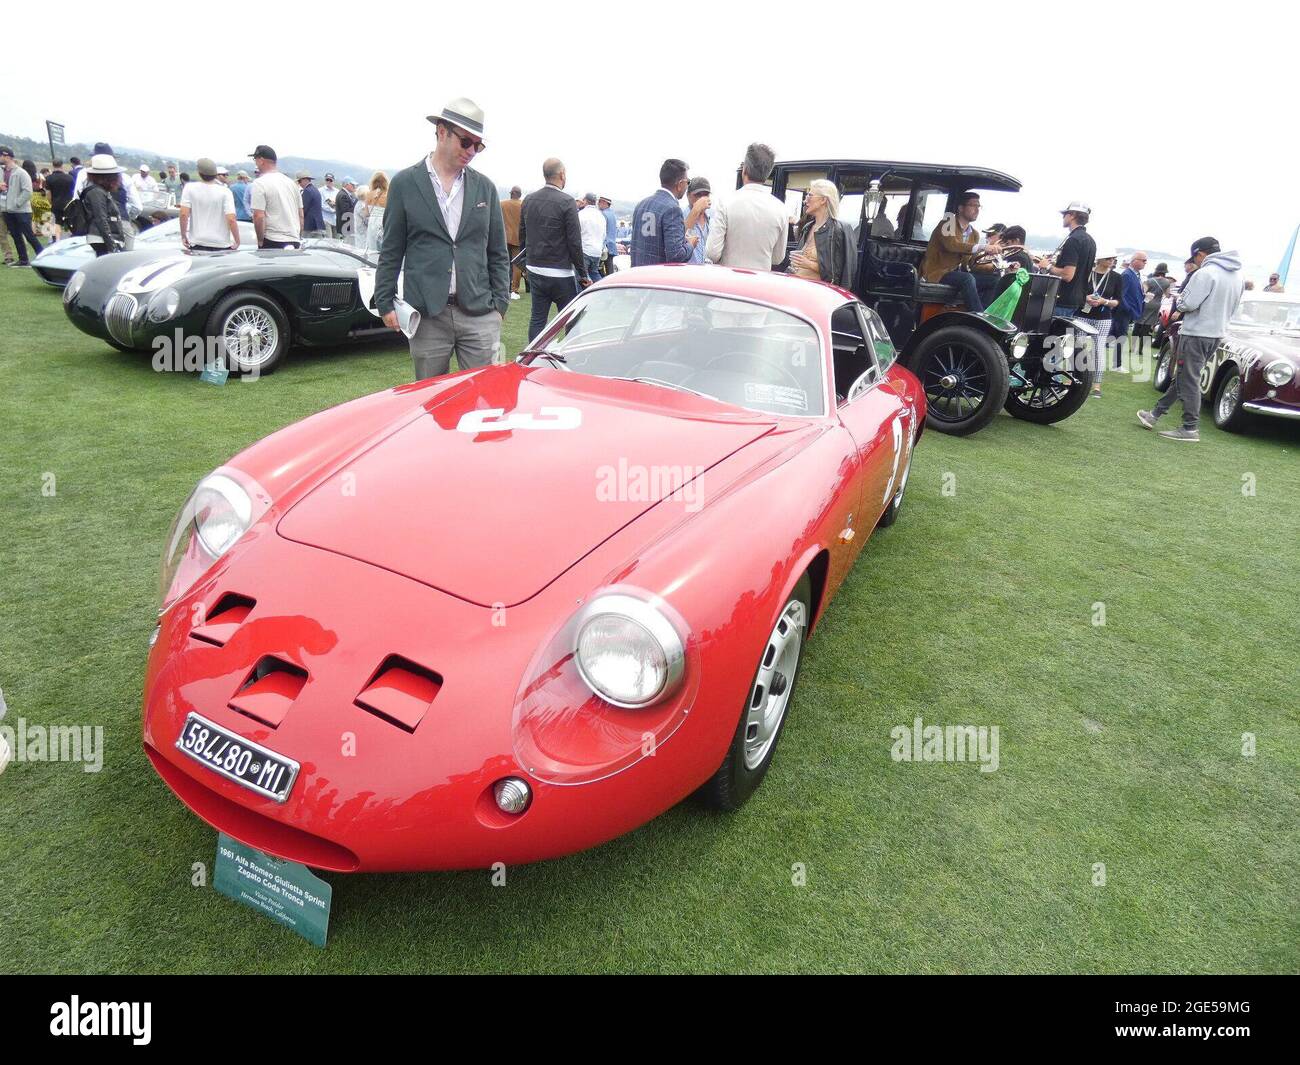 California, USA. 15th Aug, 2021. (INT) The 2021 Monterey Automotive Week Concours d'Elegance Pulls Off a Marvelous Comeback. August 15, 2021, Pebble Beach, CA, USA. Unceremoniously-interrupted by the 2020 Covid crisis, the internationally-renowned Concours d'Elegance returned in its full glory this year. Fanned by gentle Pacific onshore winds, Northern California's social and financial elite gathered under VIP tents laden with caviar and champagne to celebrate this year's return of the Monterey Peninsula's annual majestic cavalcade of vintage, classic and state-of-the-art, luxury-tier, automo Stock Photo